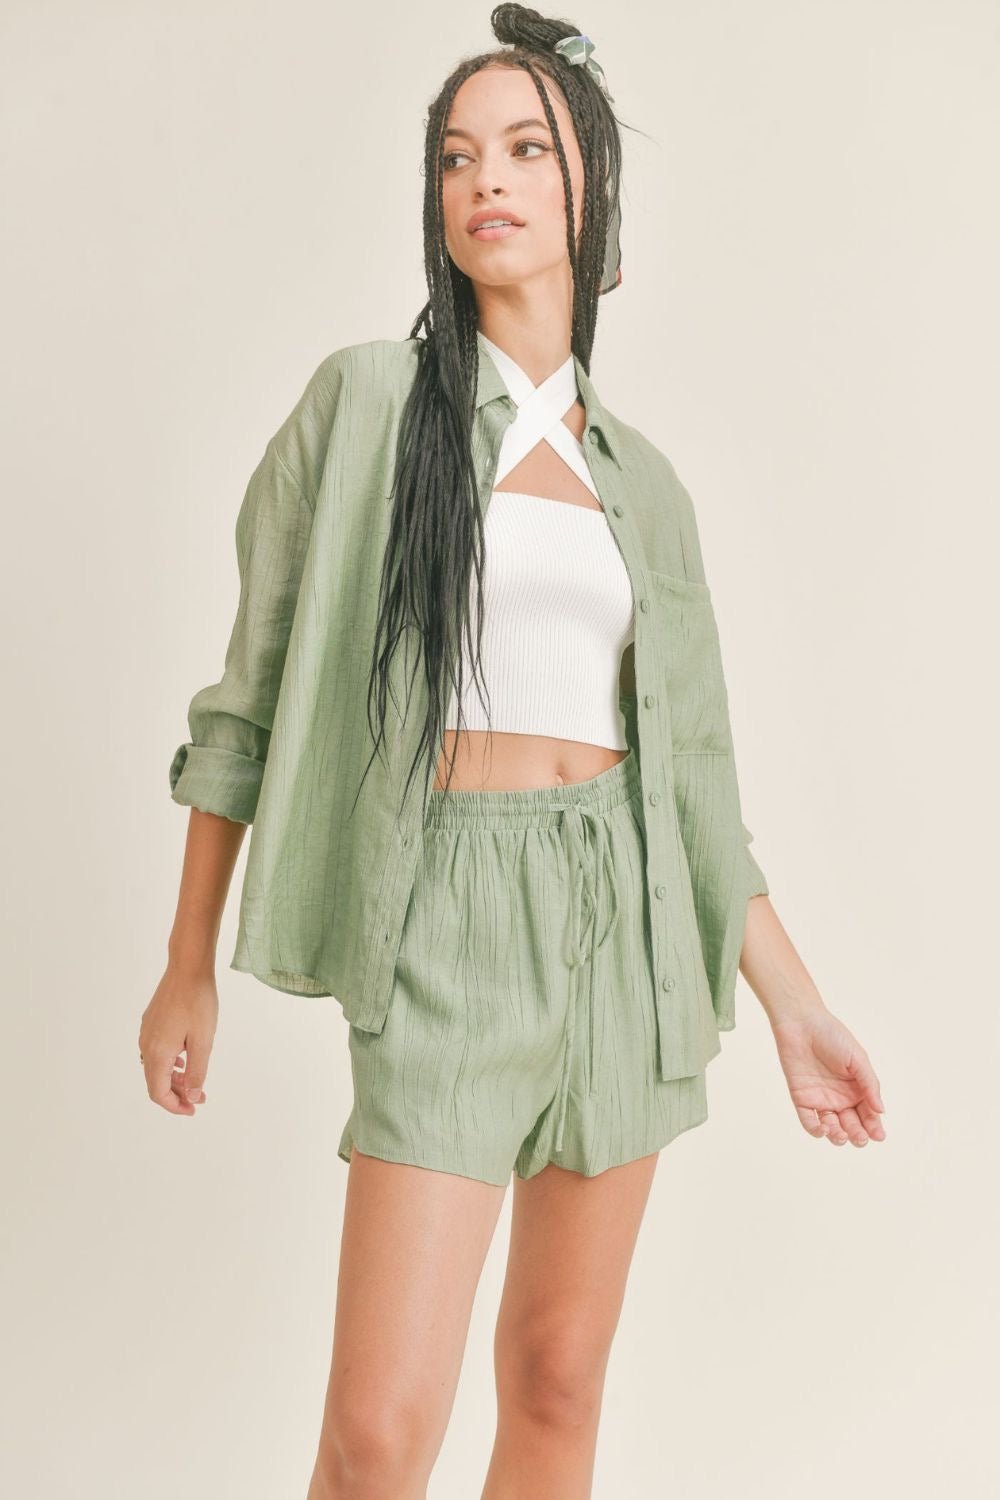 Sage The Label | Long Sleeve Button Down Top | Pistachio Green - Women&#39;s Shirts &amp; Tops - Blooming Daily